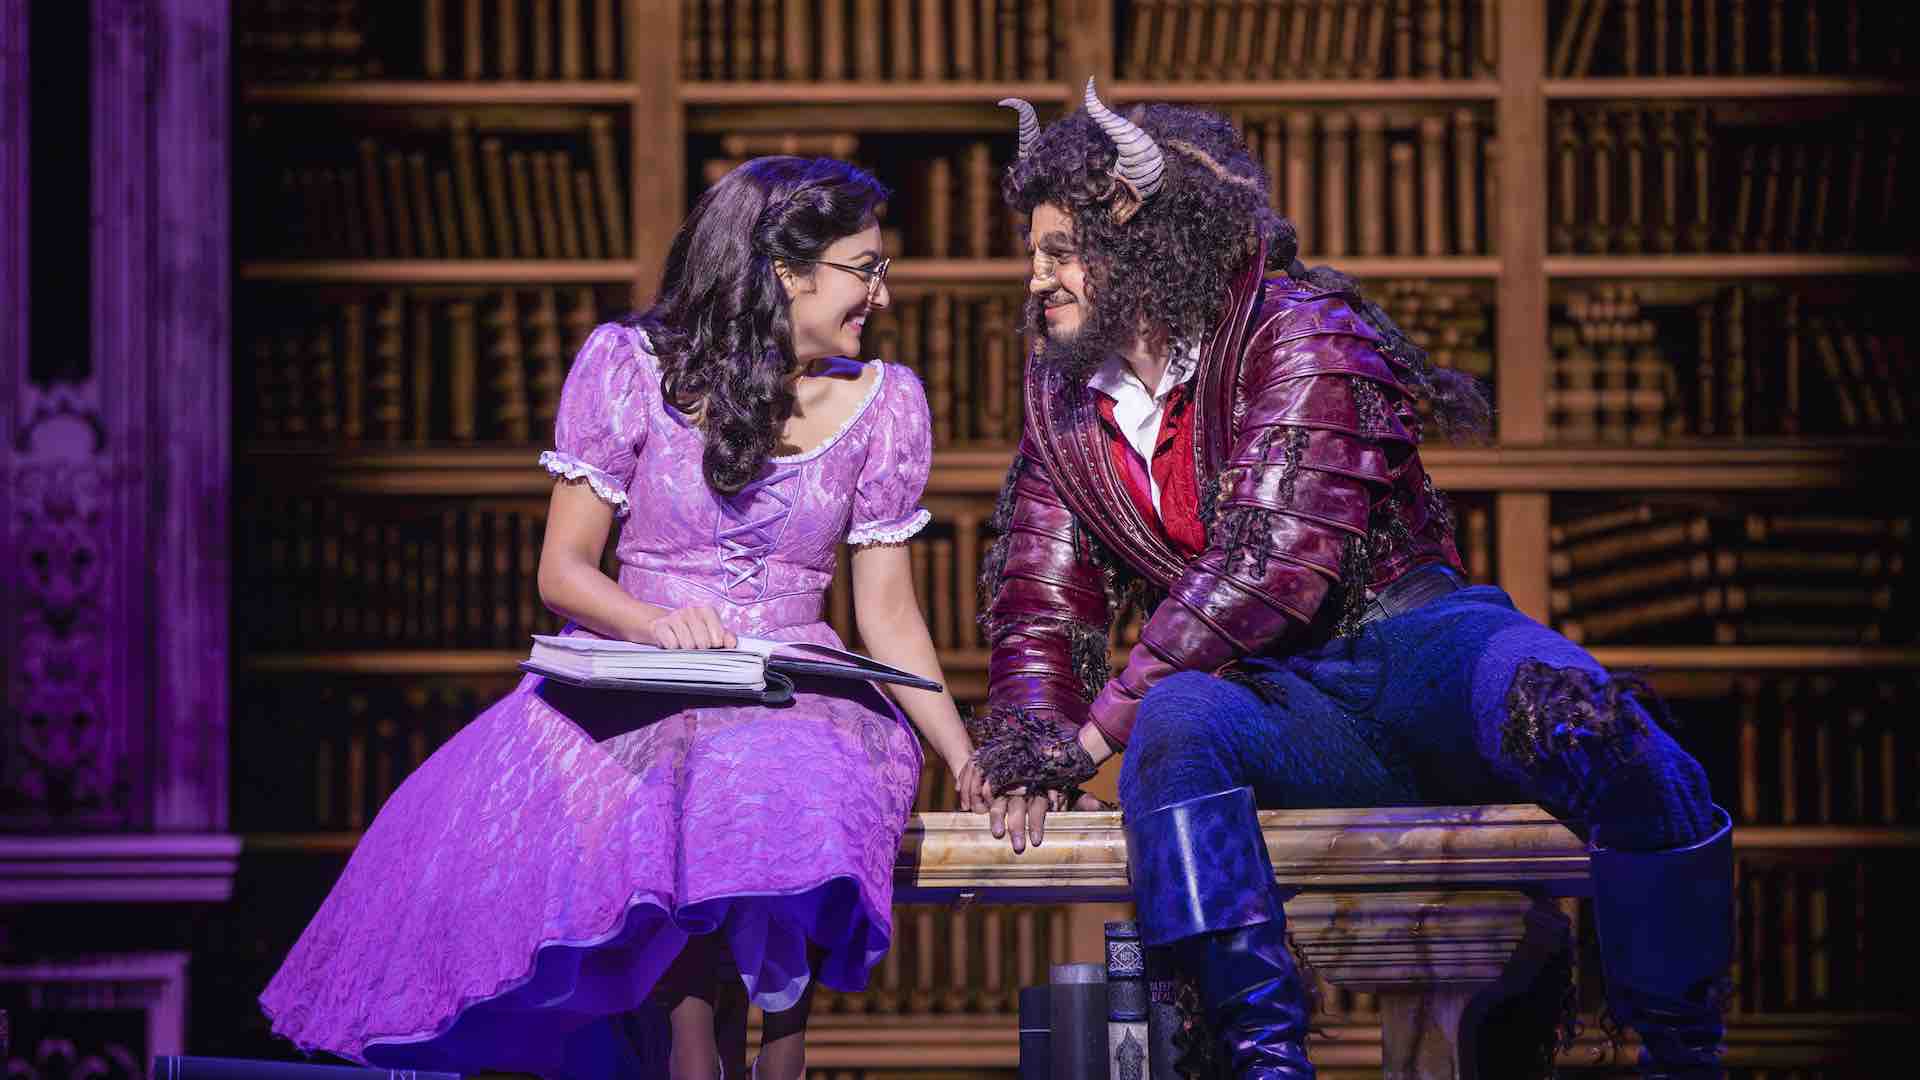 Disney's Beauty and the Beast: The Musical